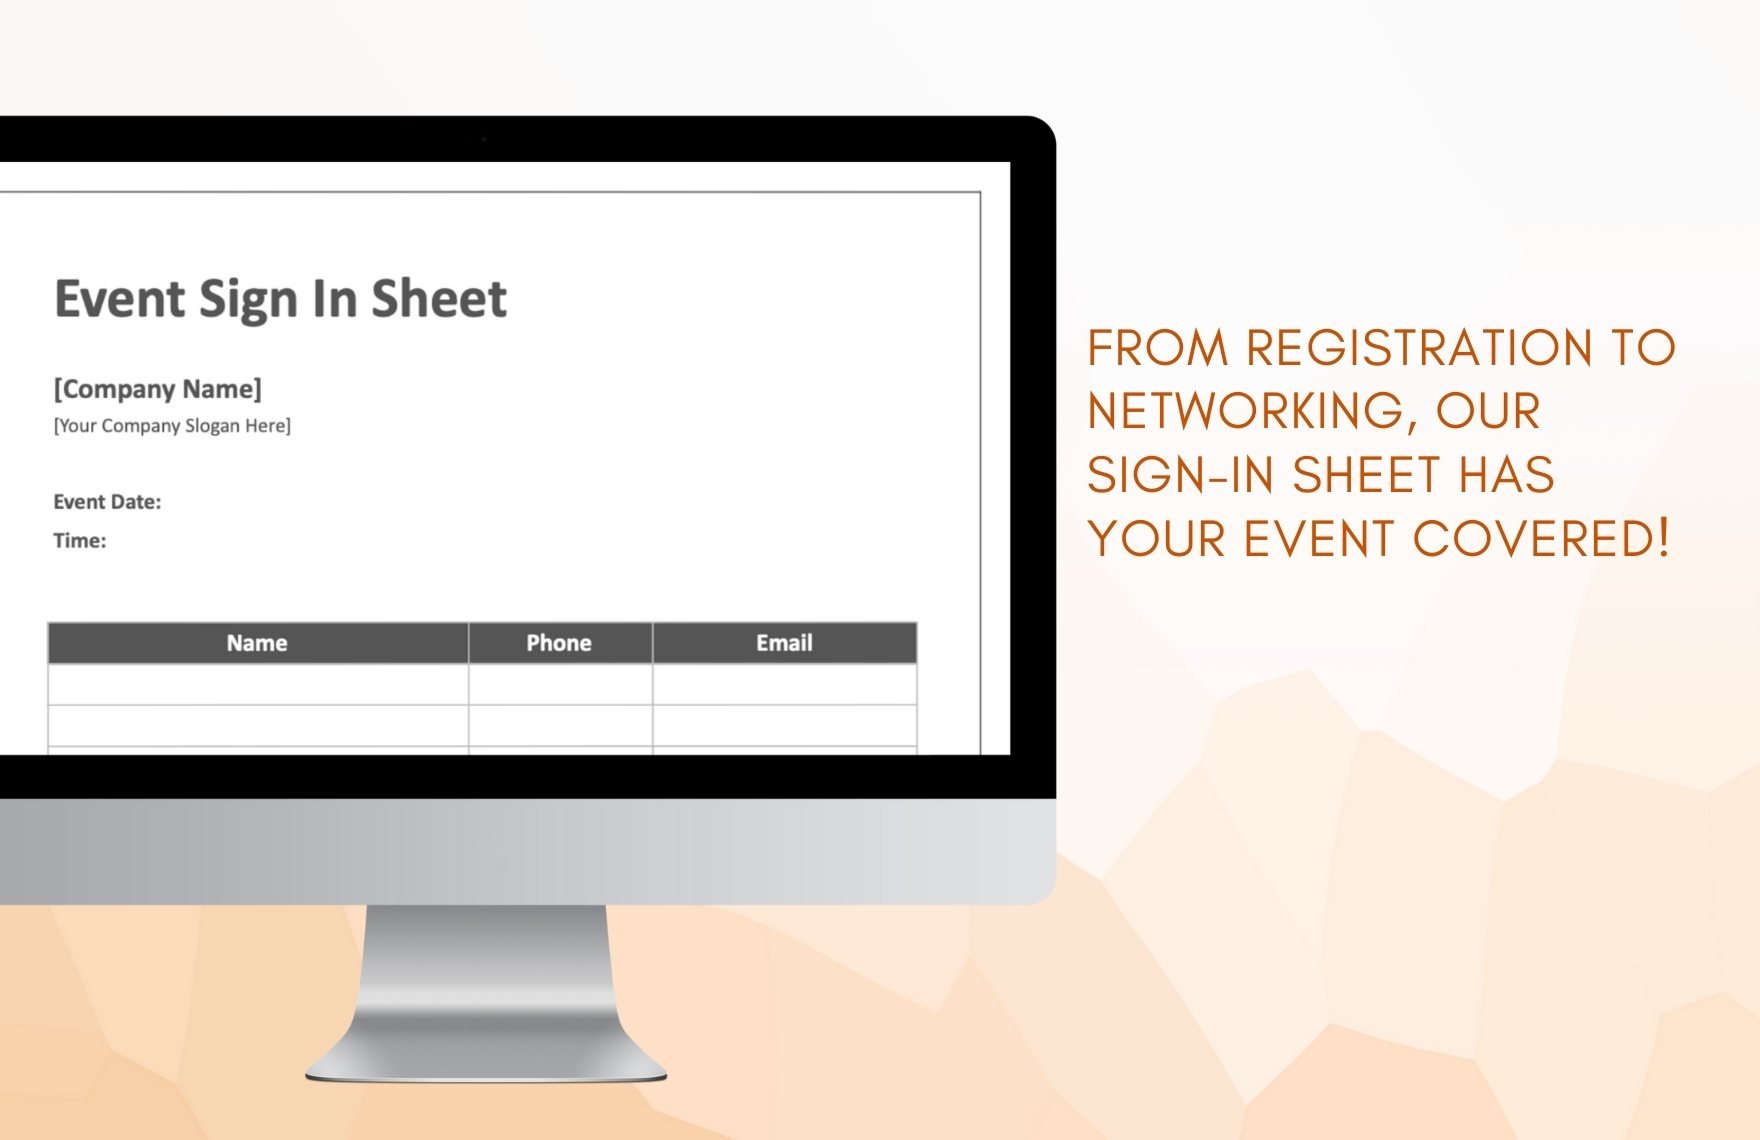 Event Sign in Sheet Template